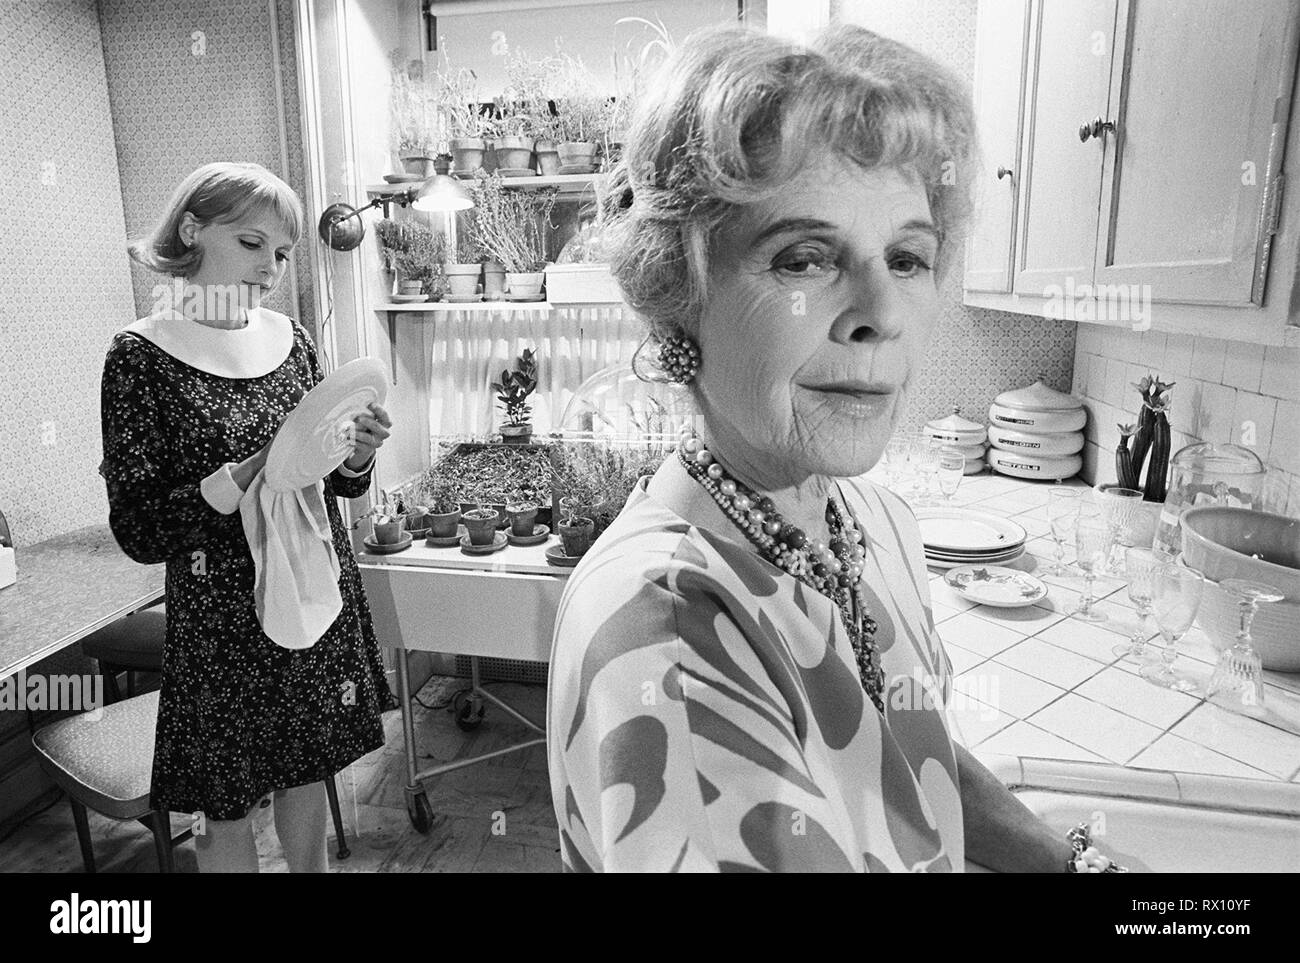 RUTH GORDON and MIA FARROW in ROSEMARY'S BABY (1968), directed by ROMAN POLANSKI. Credit: PARAMOUNT PICTURES / Album Stock Photo